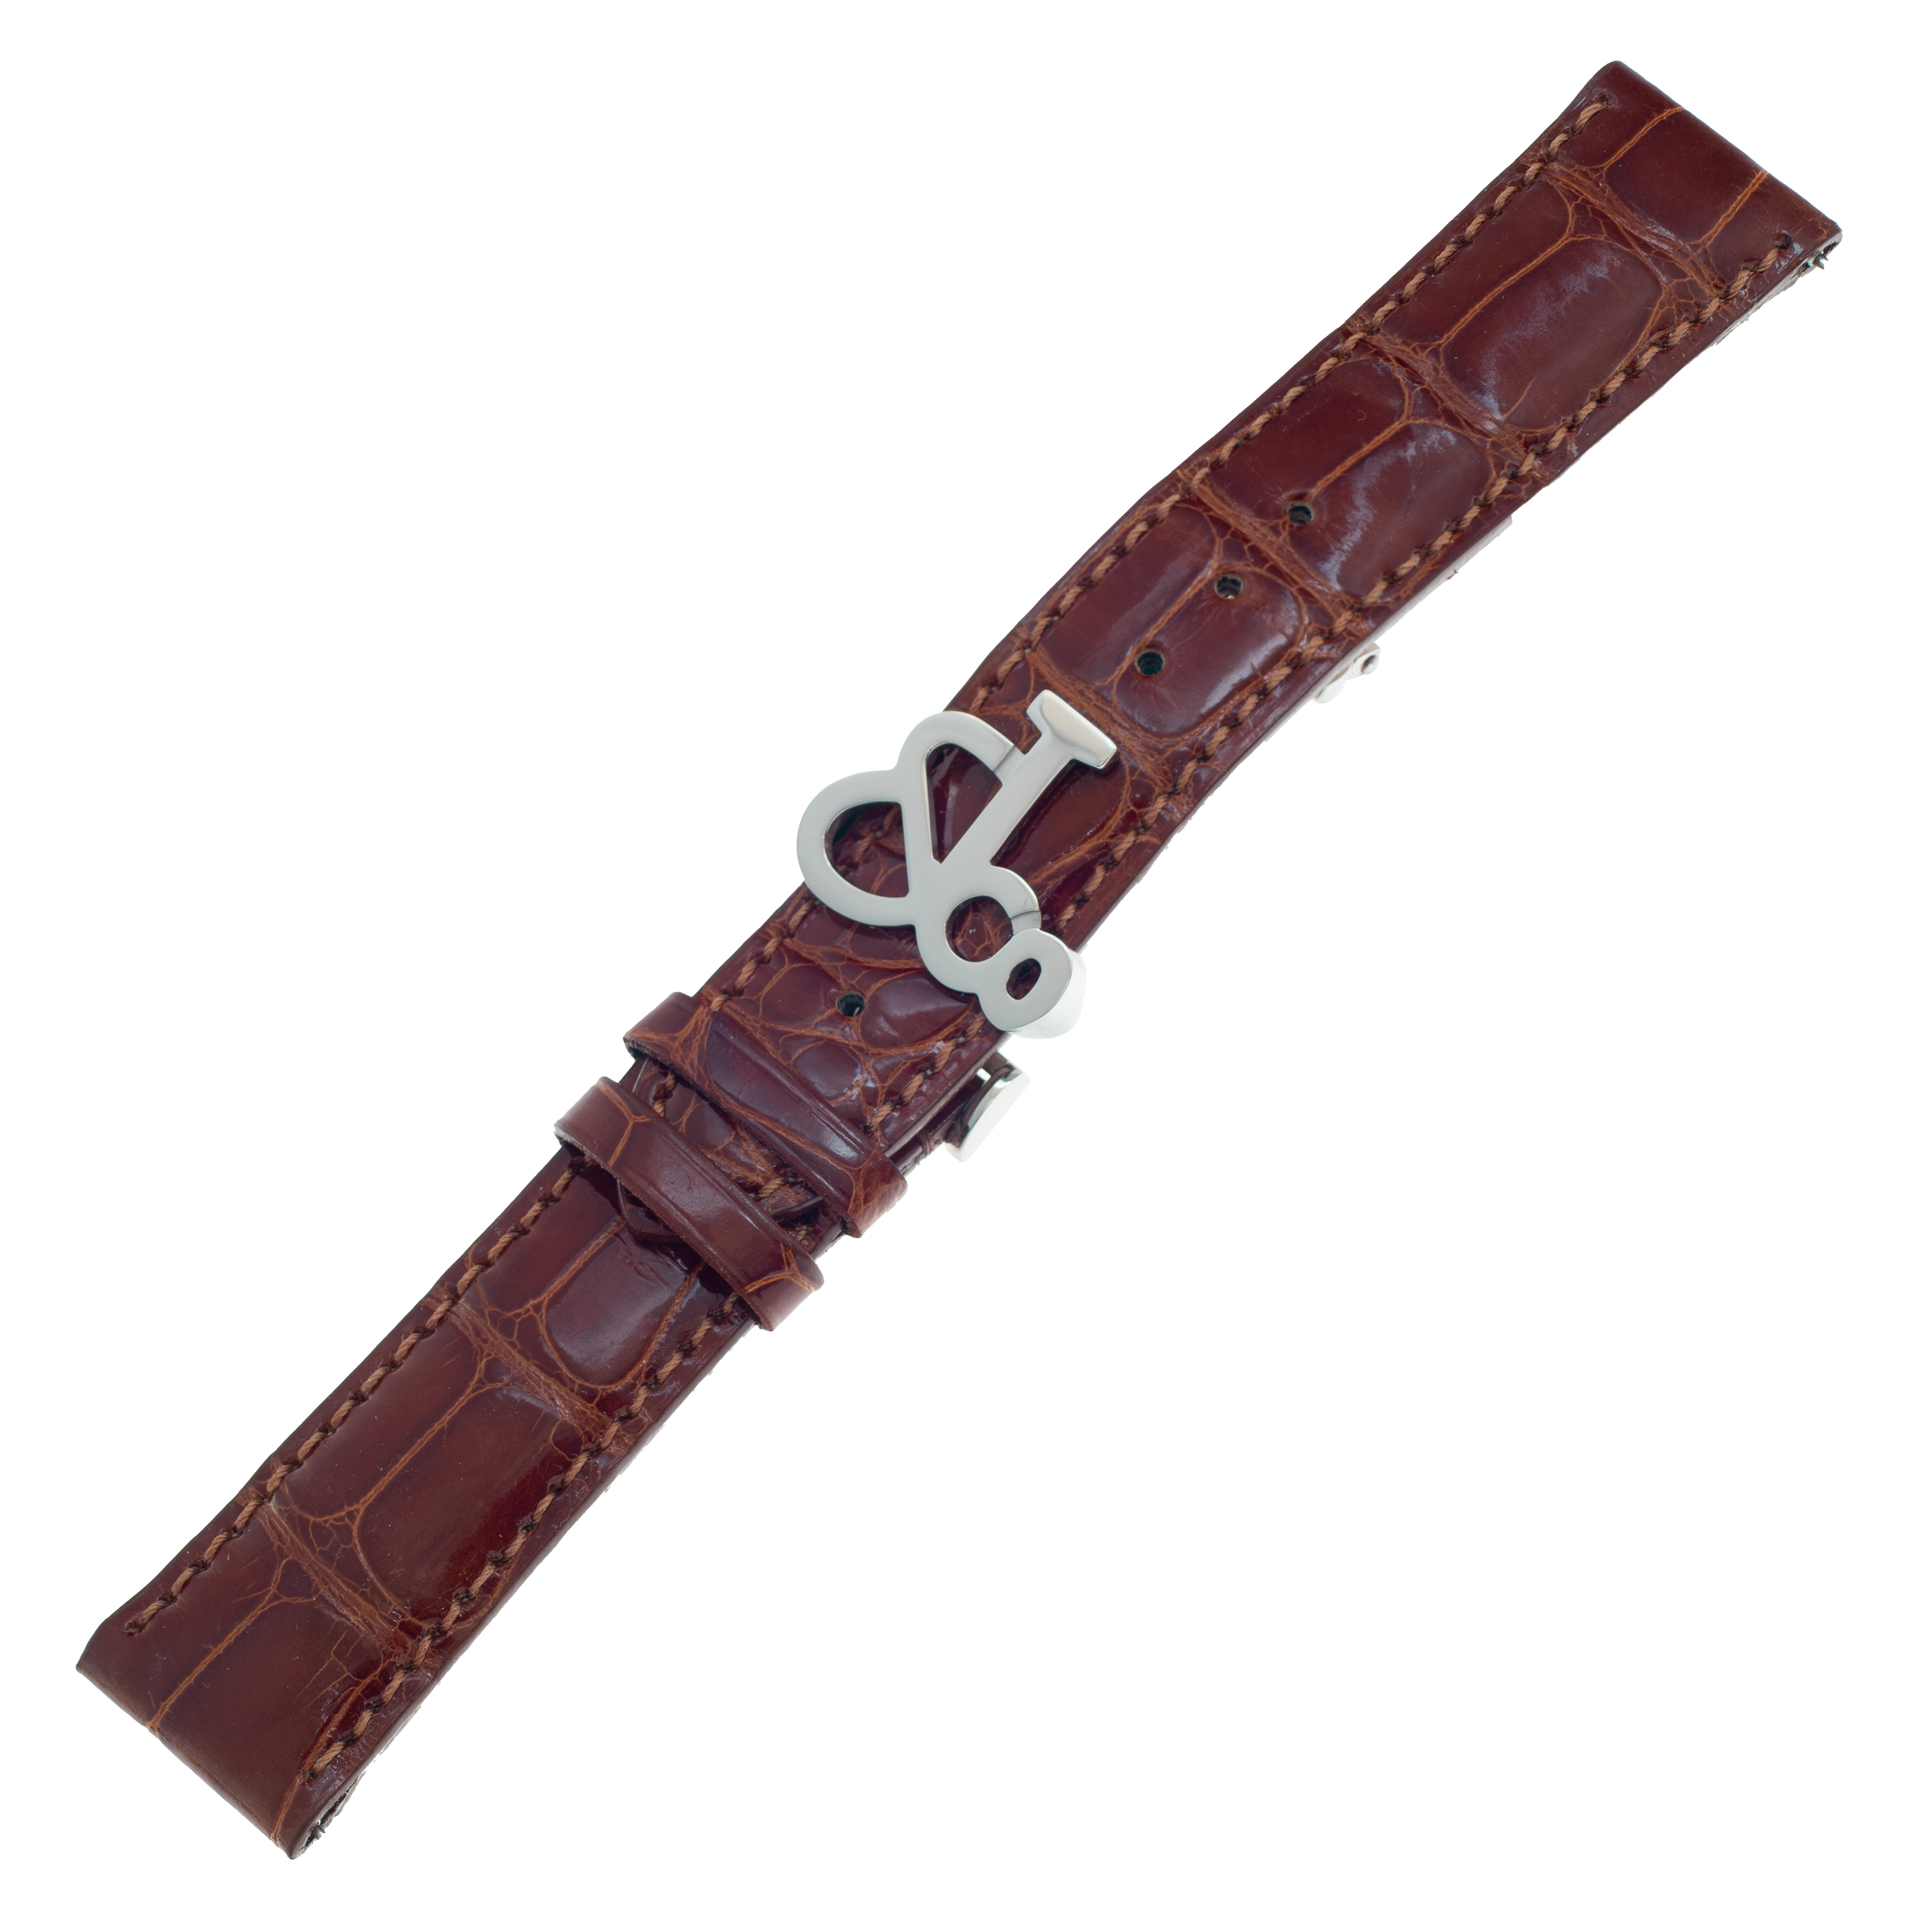 Jacob & Co. brown alligator strap with J&Co. stainless steel buckle  20mm x 18mm